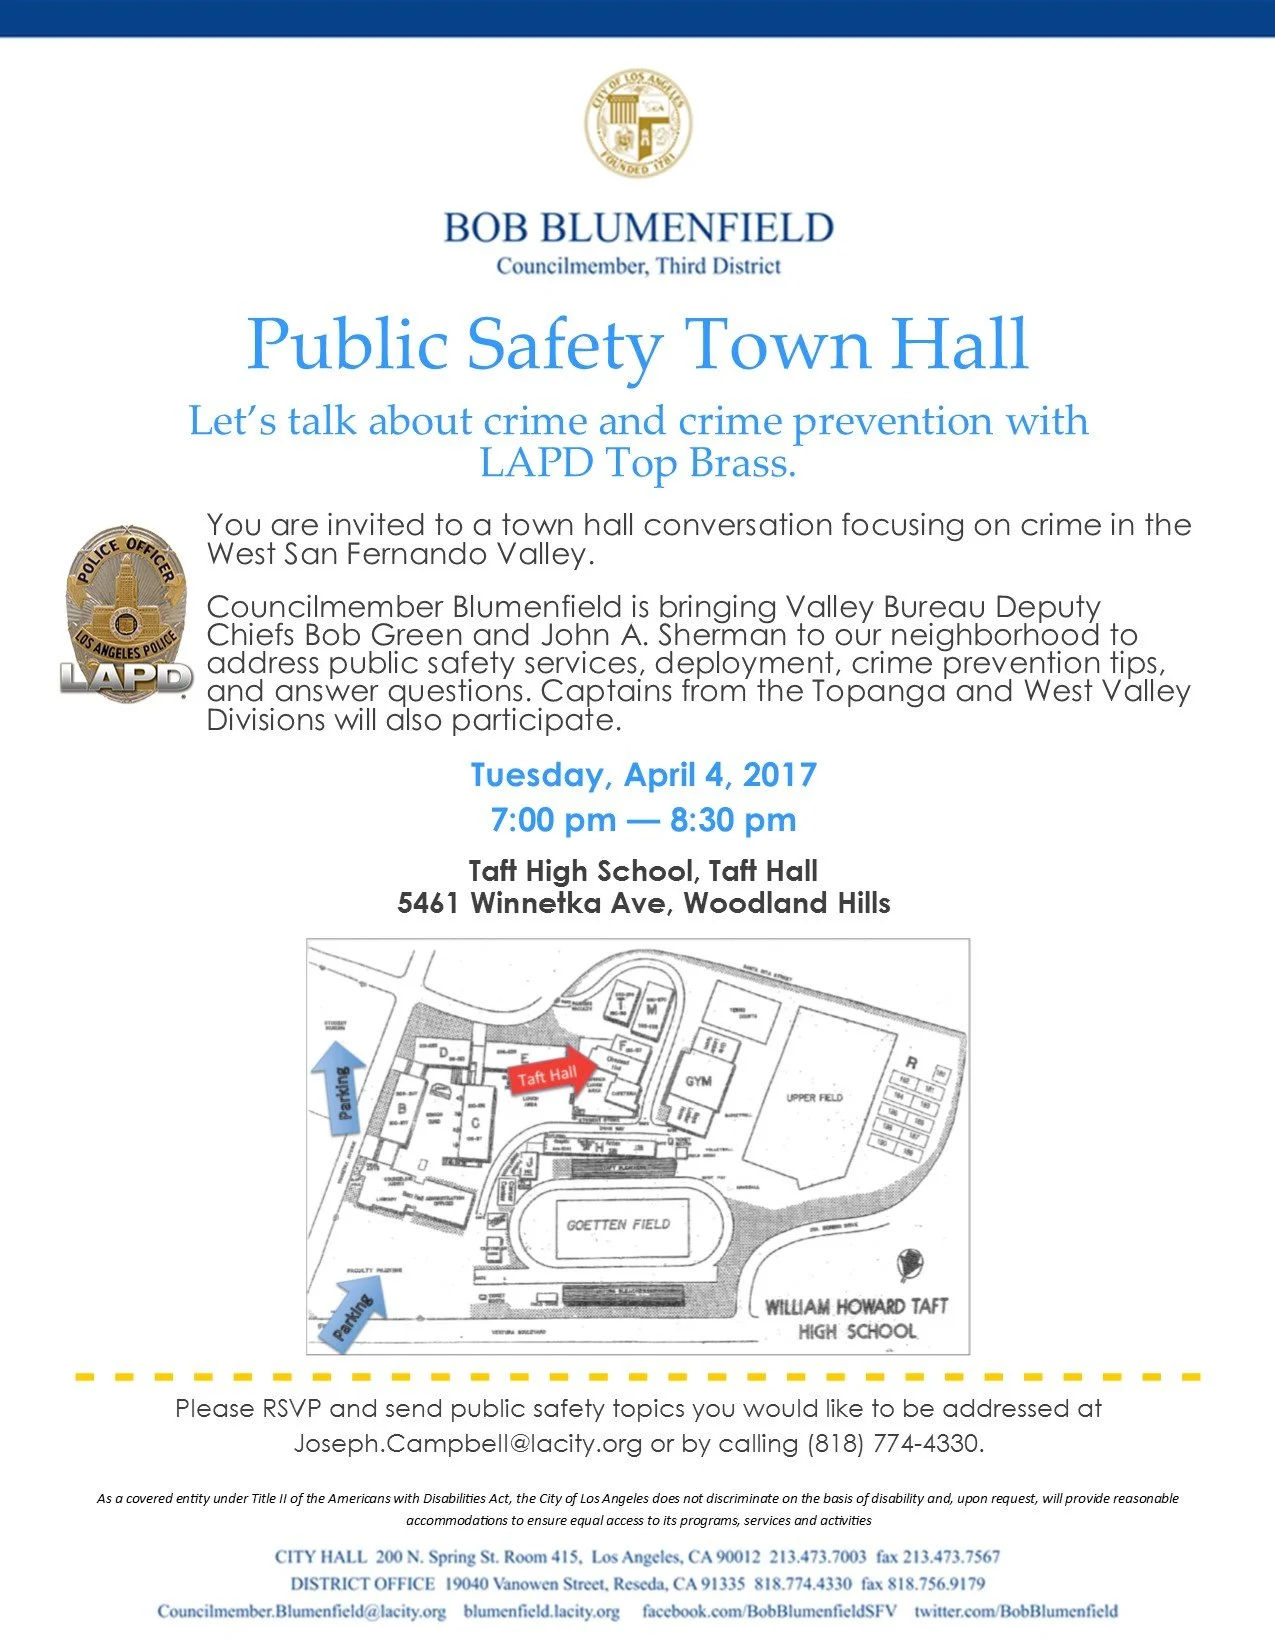 Public Safety Town Hall – Tuesday, April 4